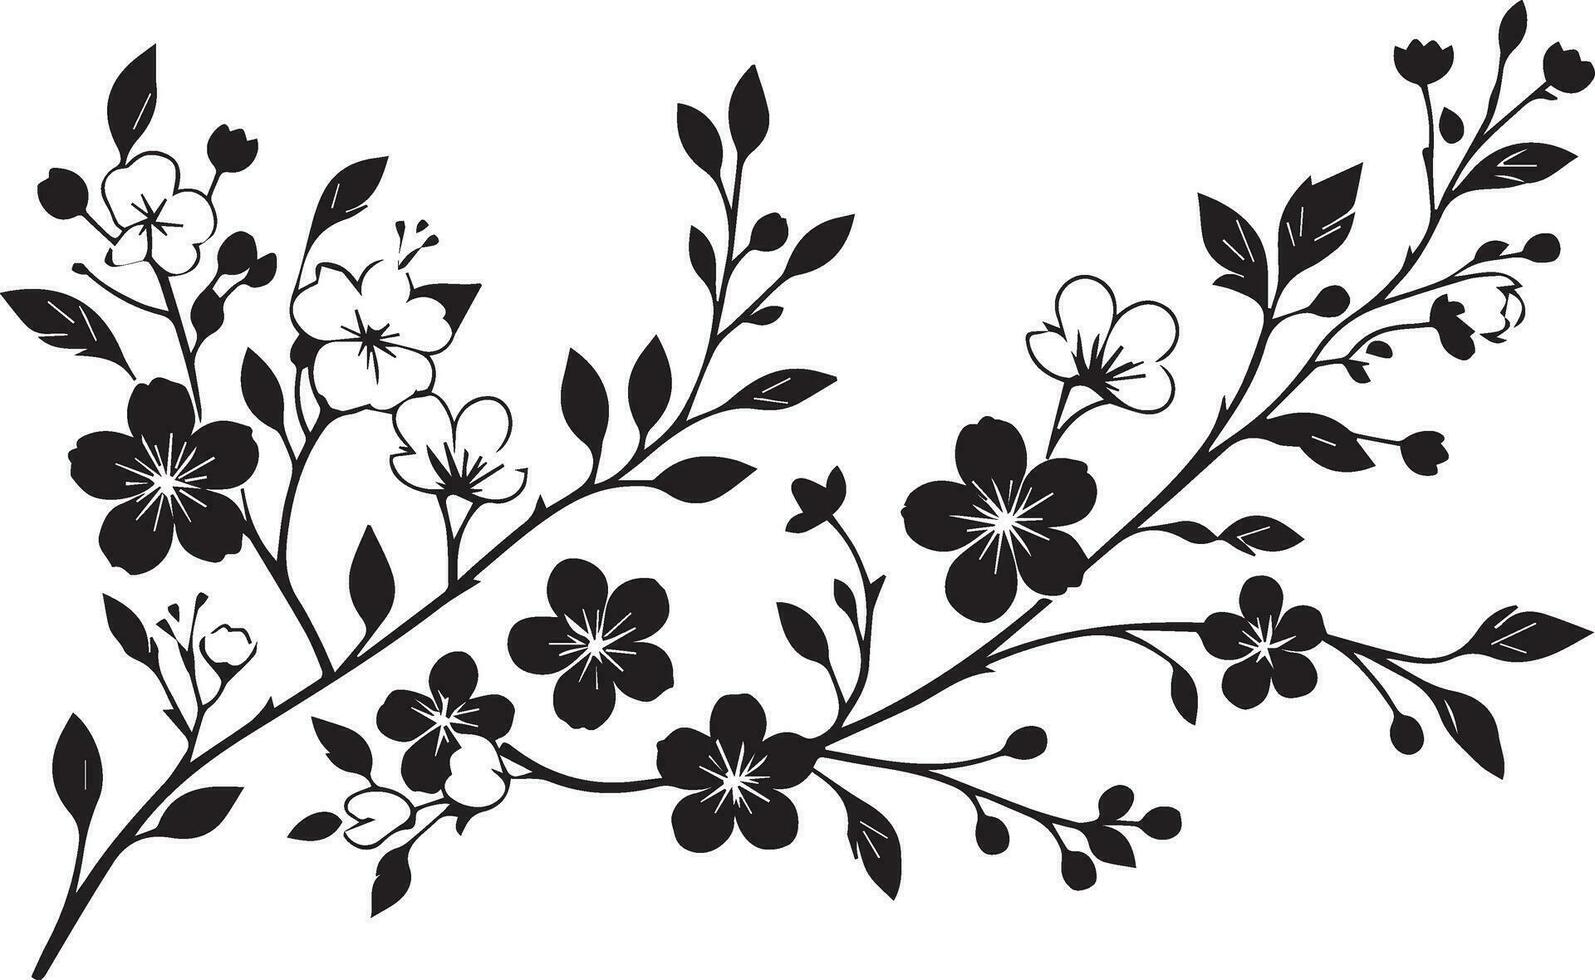 minimal Blooming floral branch silhouette vector illustration, white background